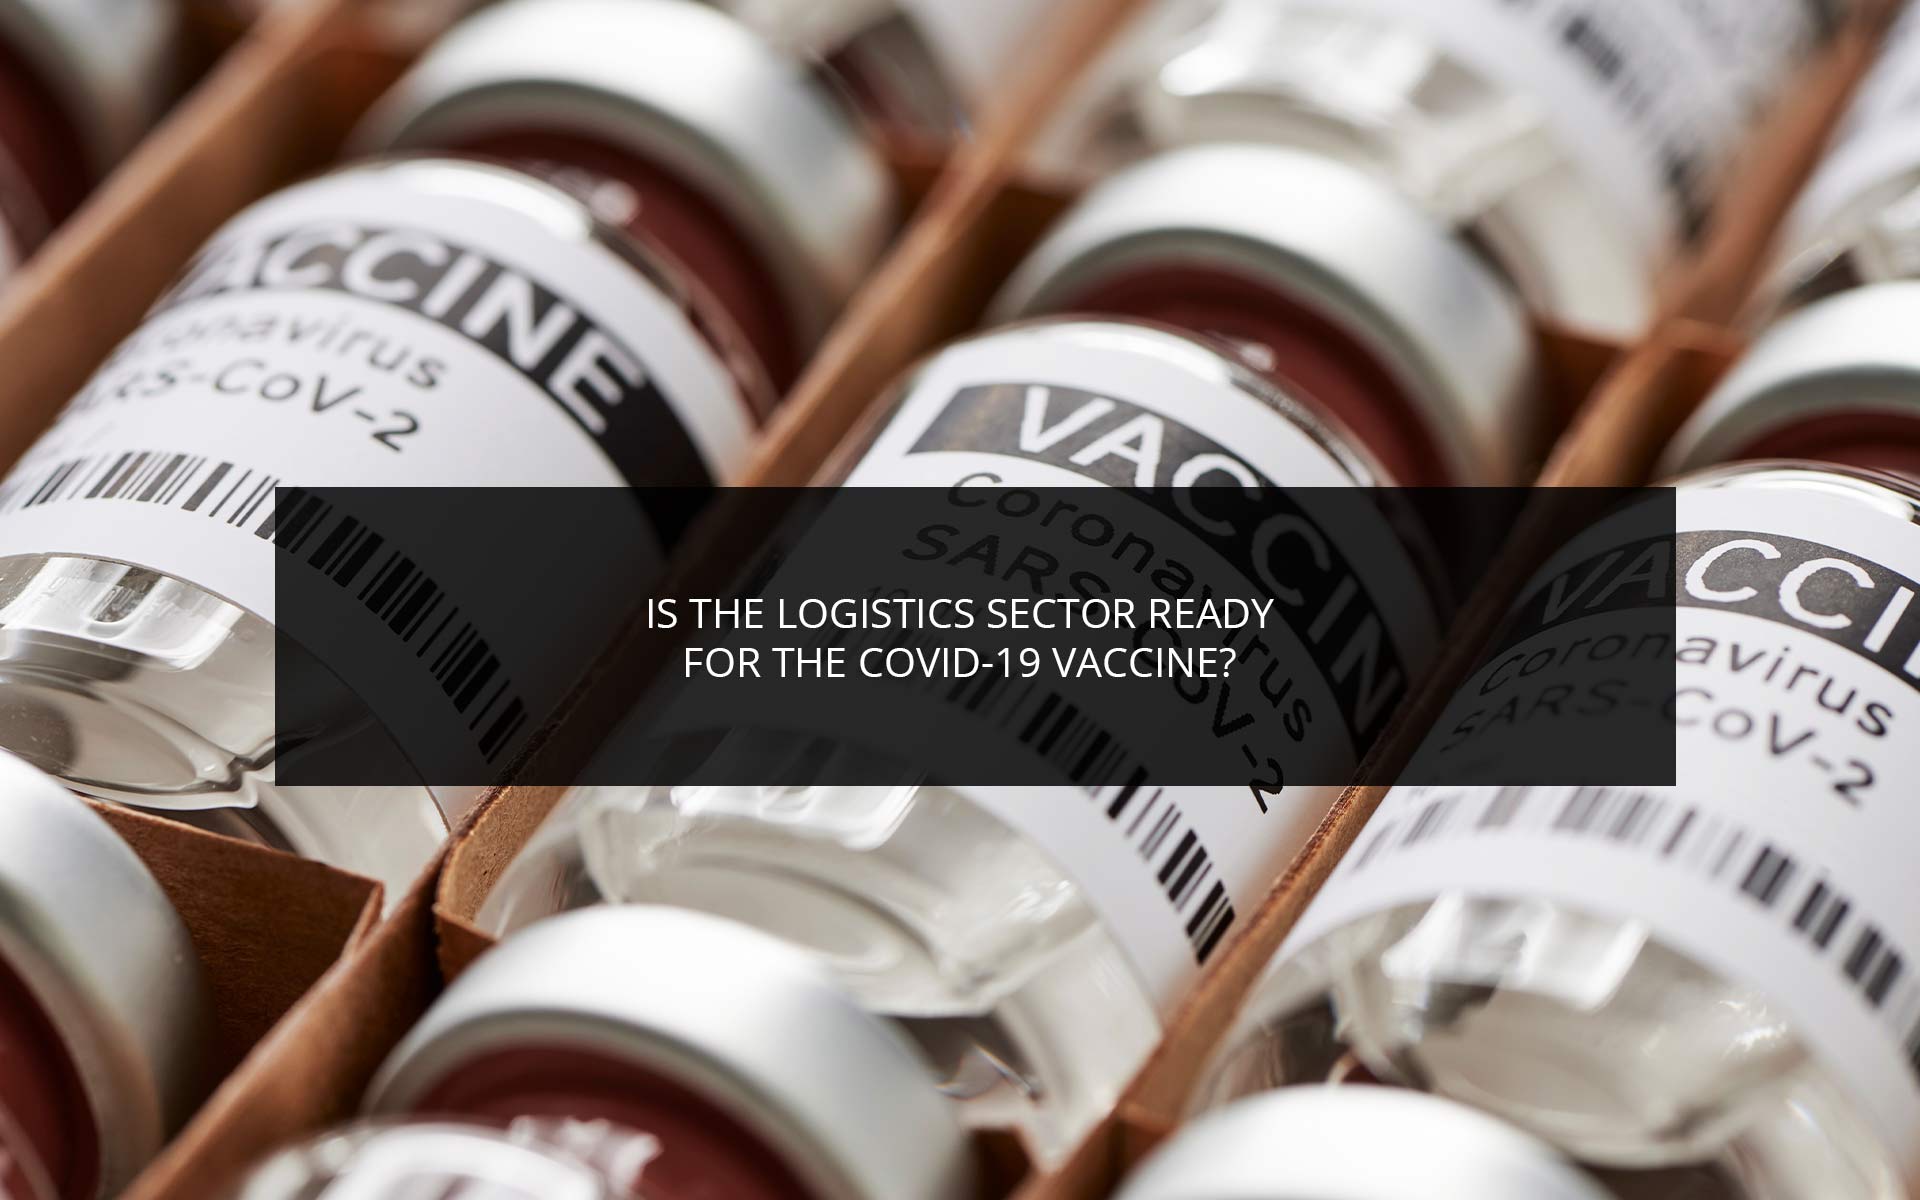 Is the Logistics Sector Ready for the COVID-19 Vaccine?